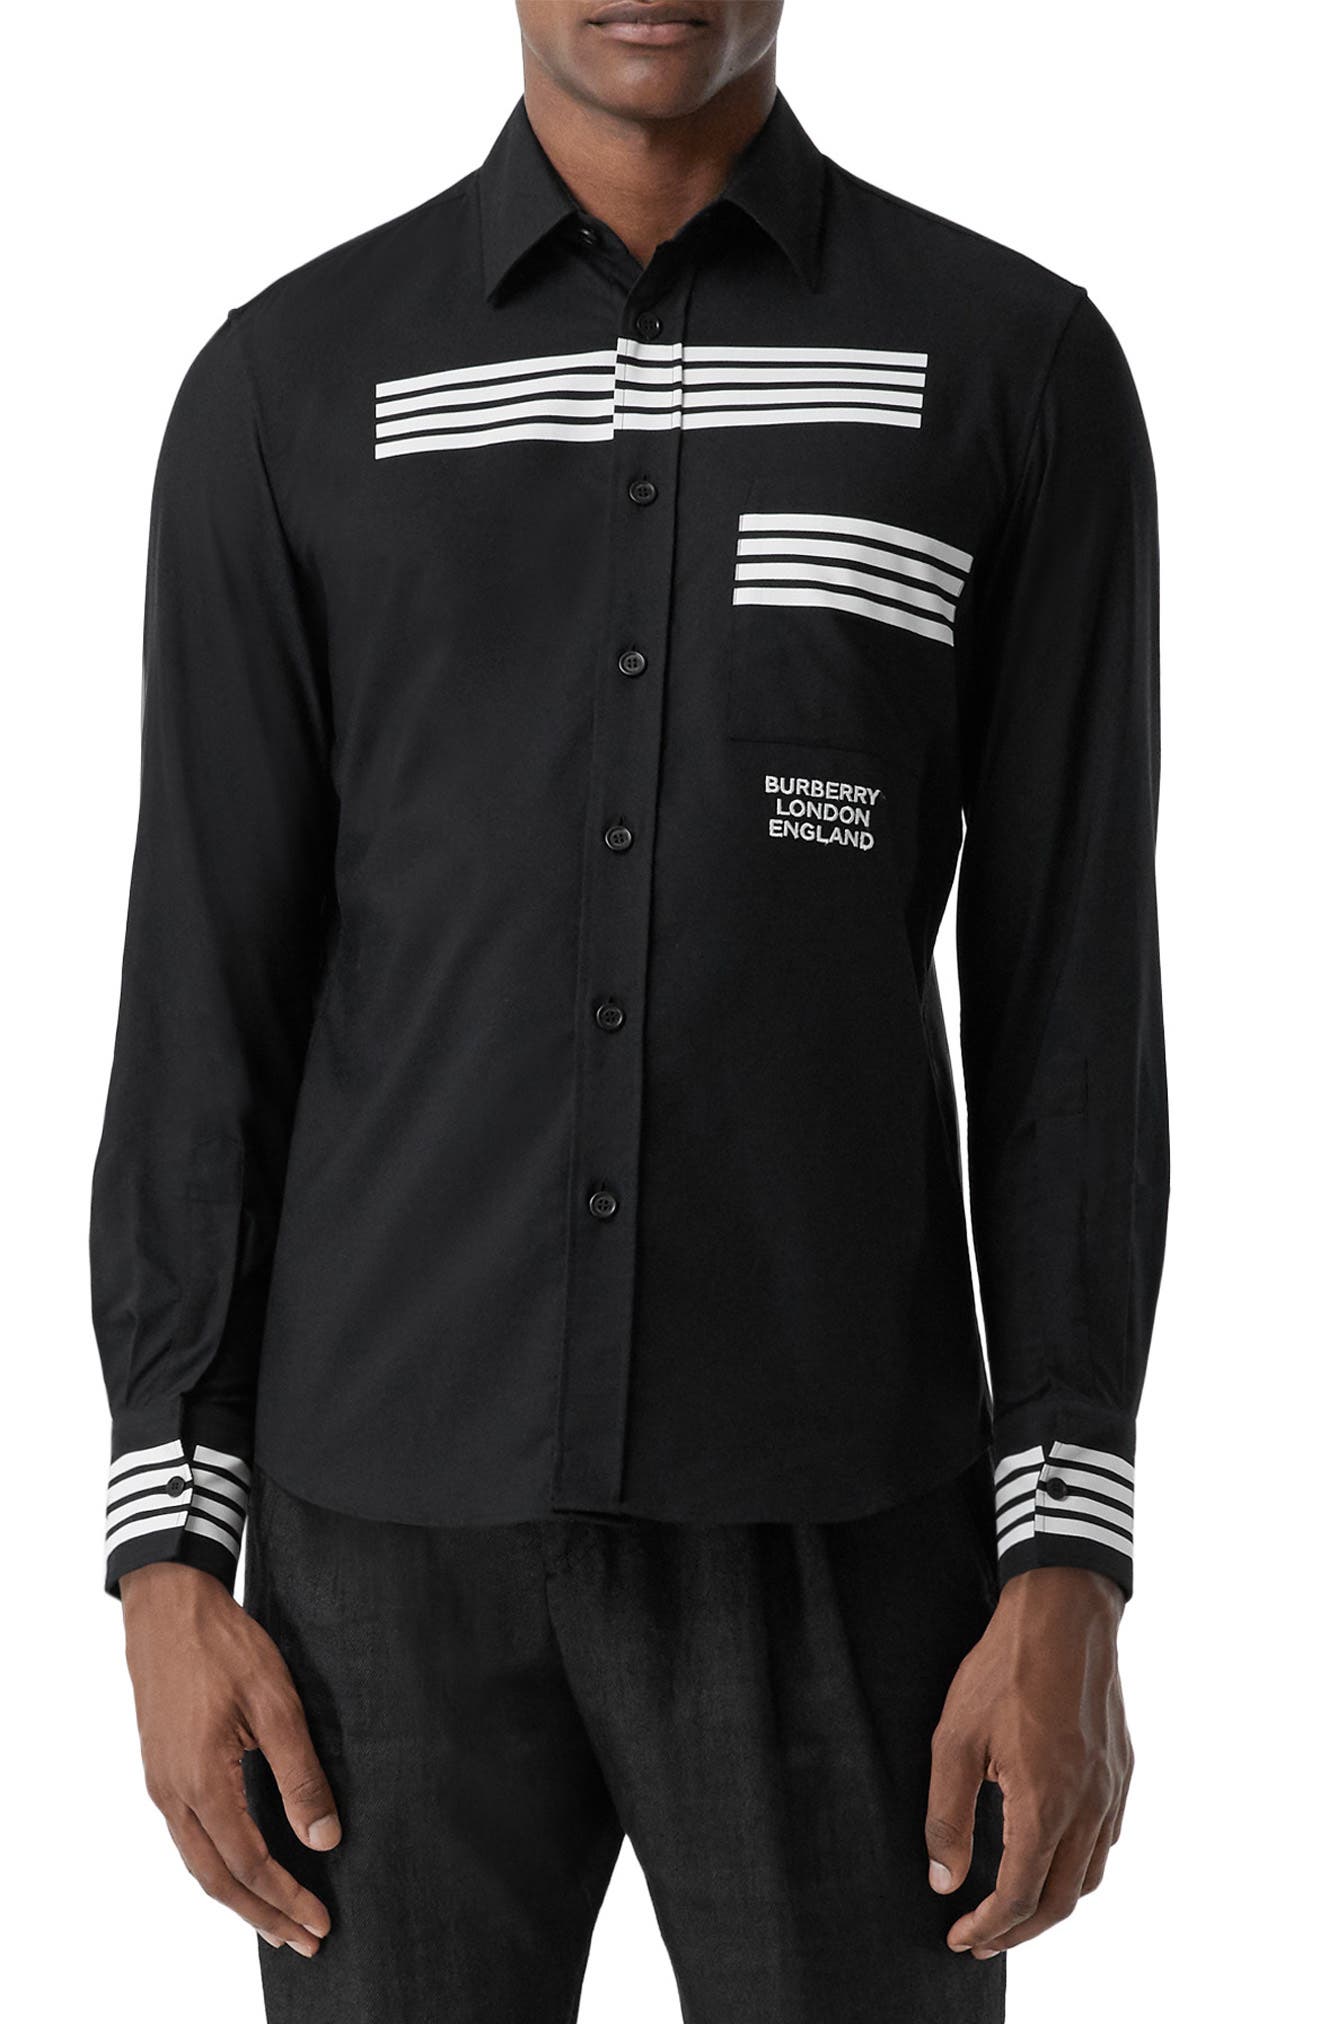 burberry button up black